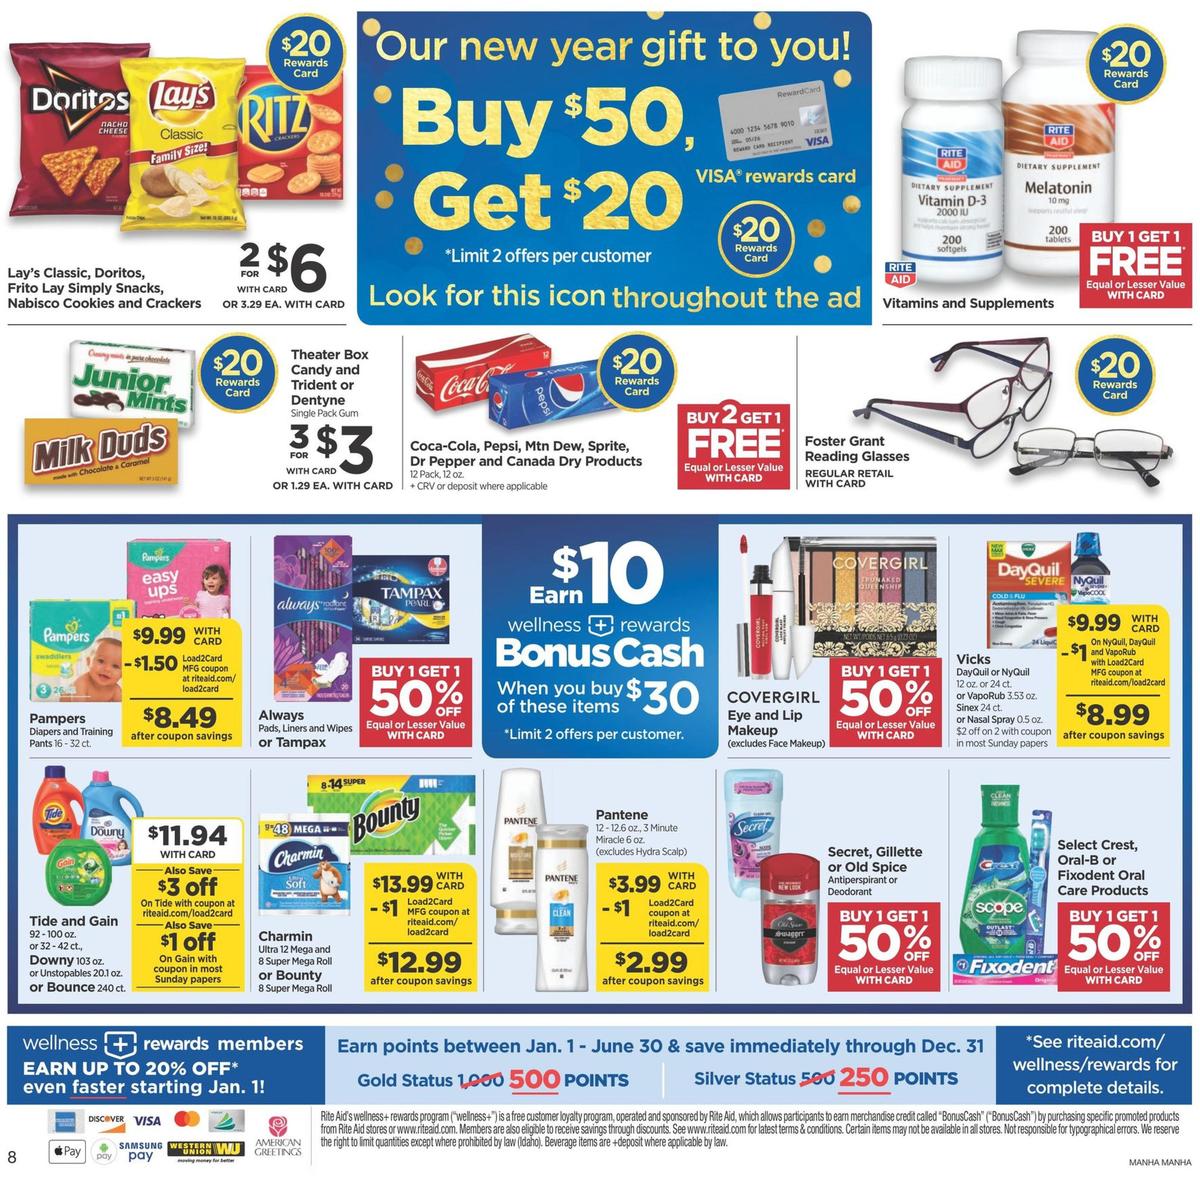 Rite Aid Weekly Ad from January 12